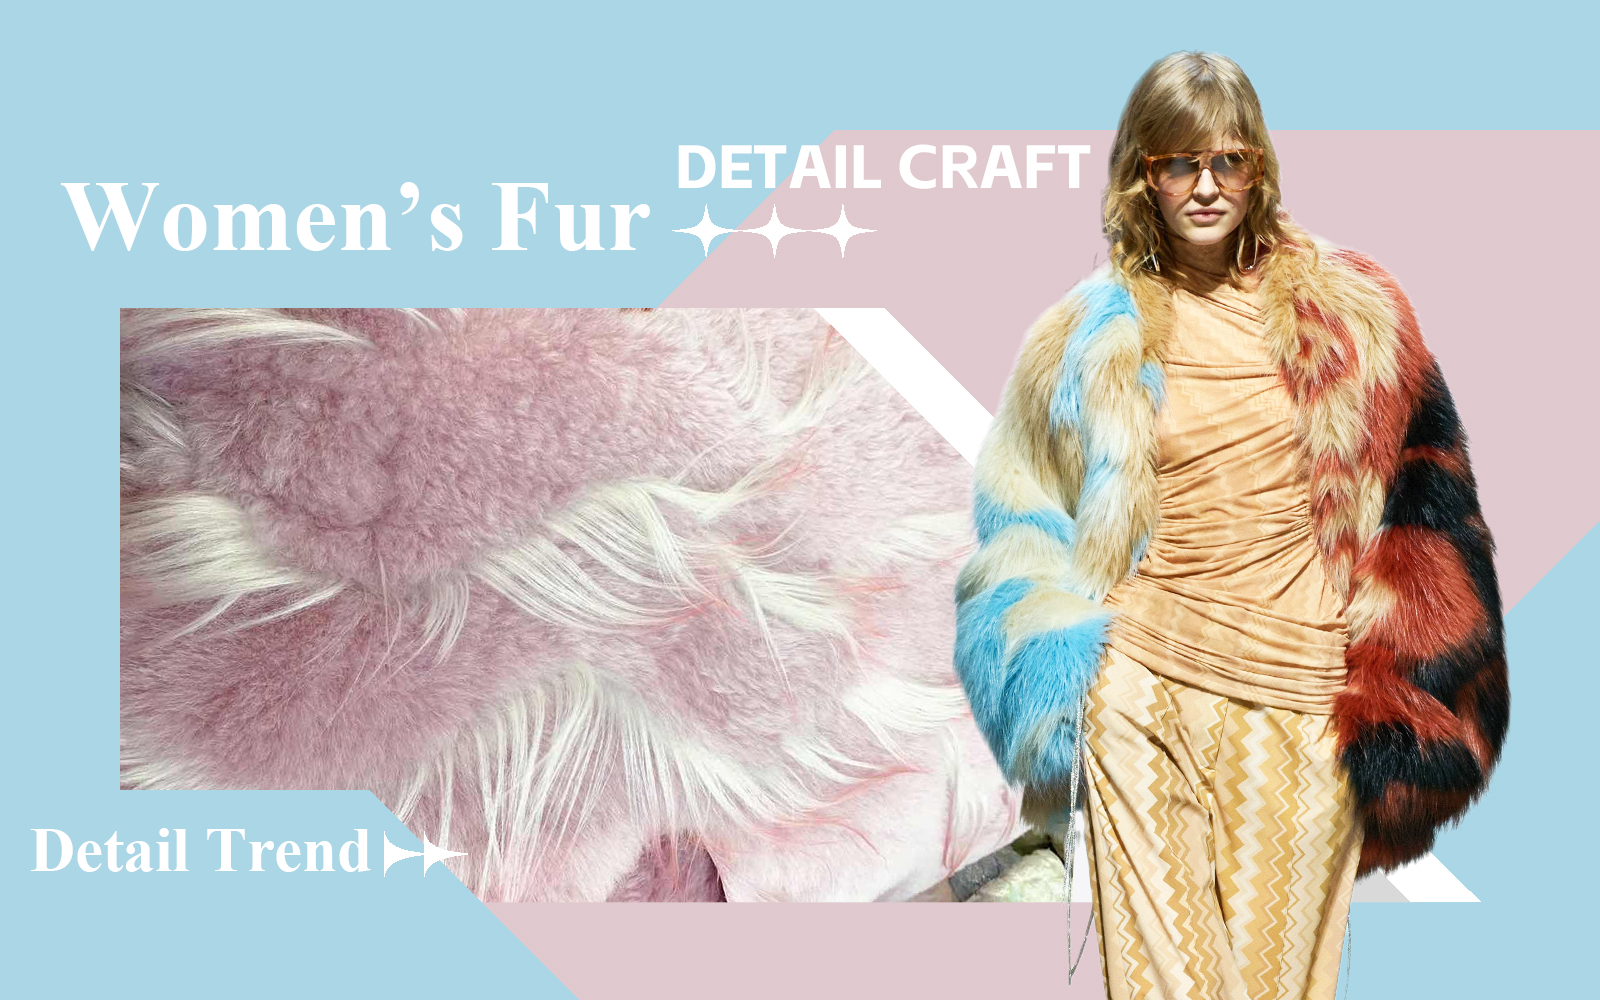 The Detail & Craft Trend for Women's Fur